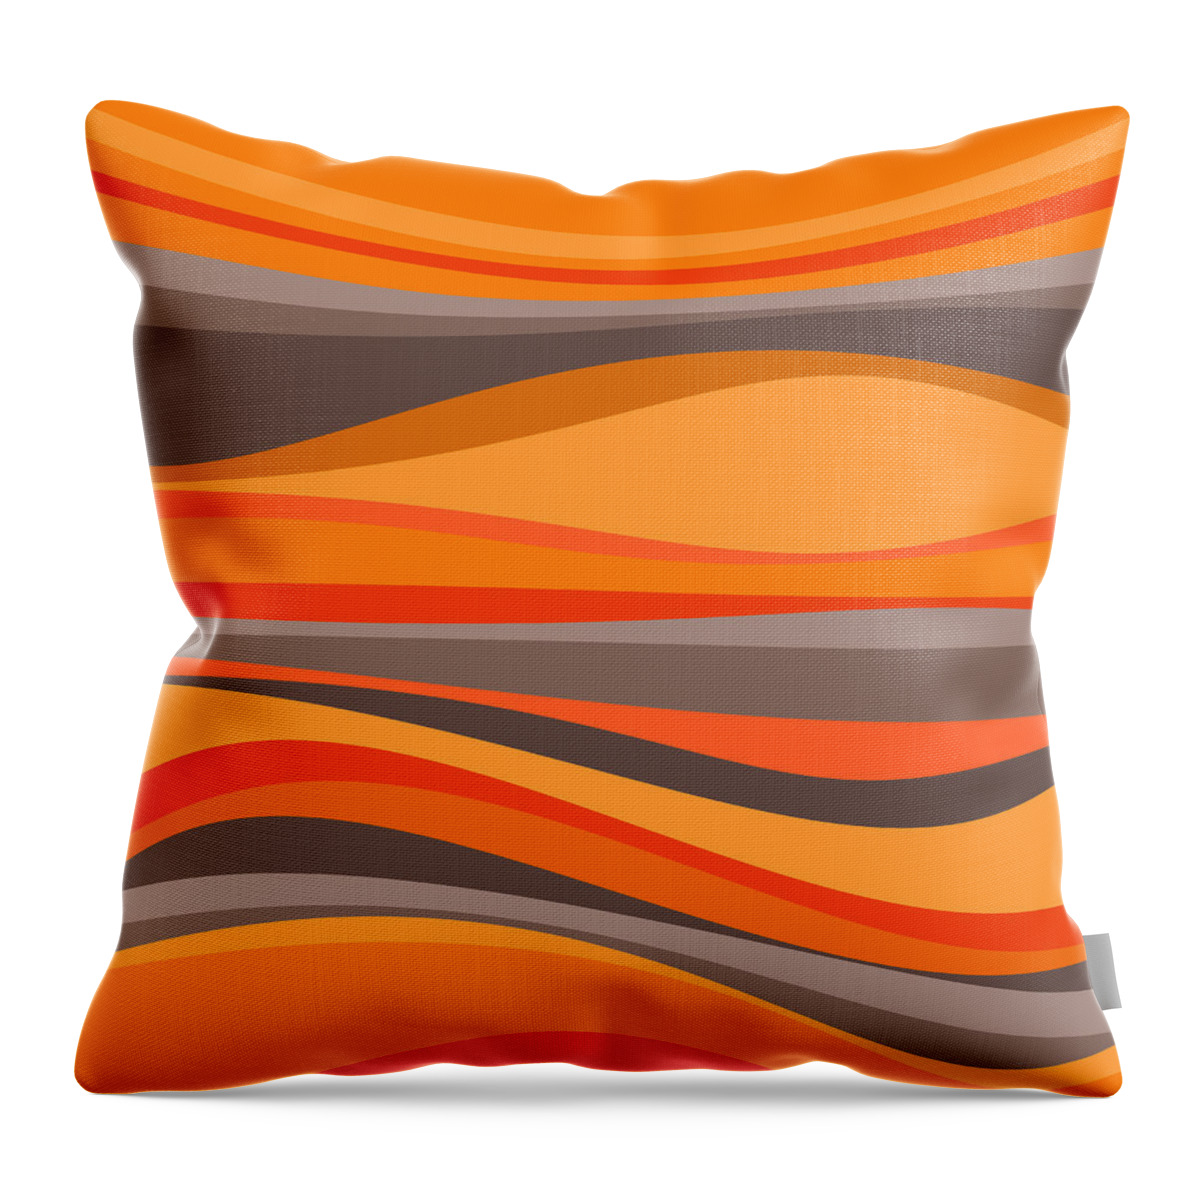 Orange Dance Abstract Throw Pillow featuring the digital art Orange Dance Abstract by Val Arie